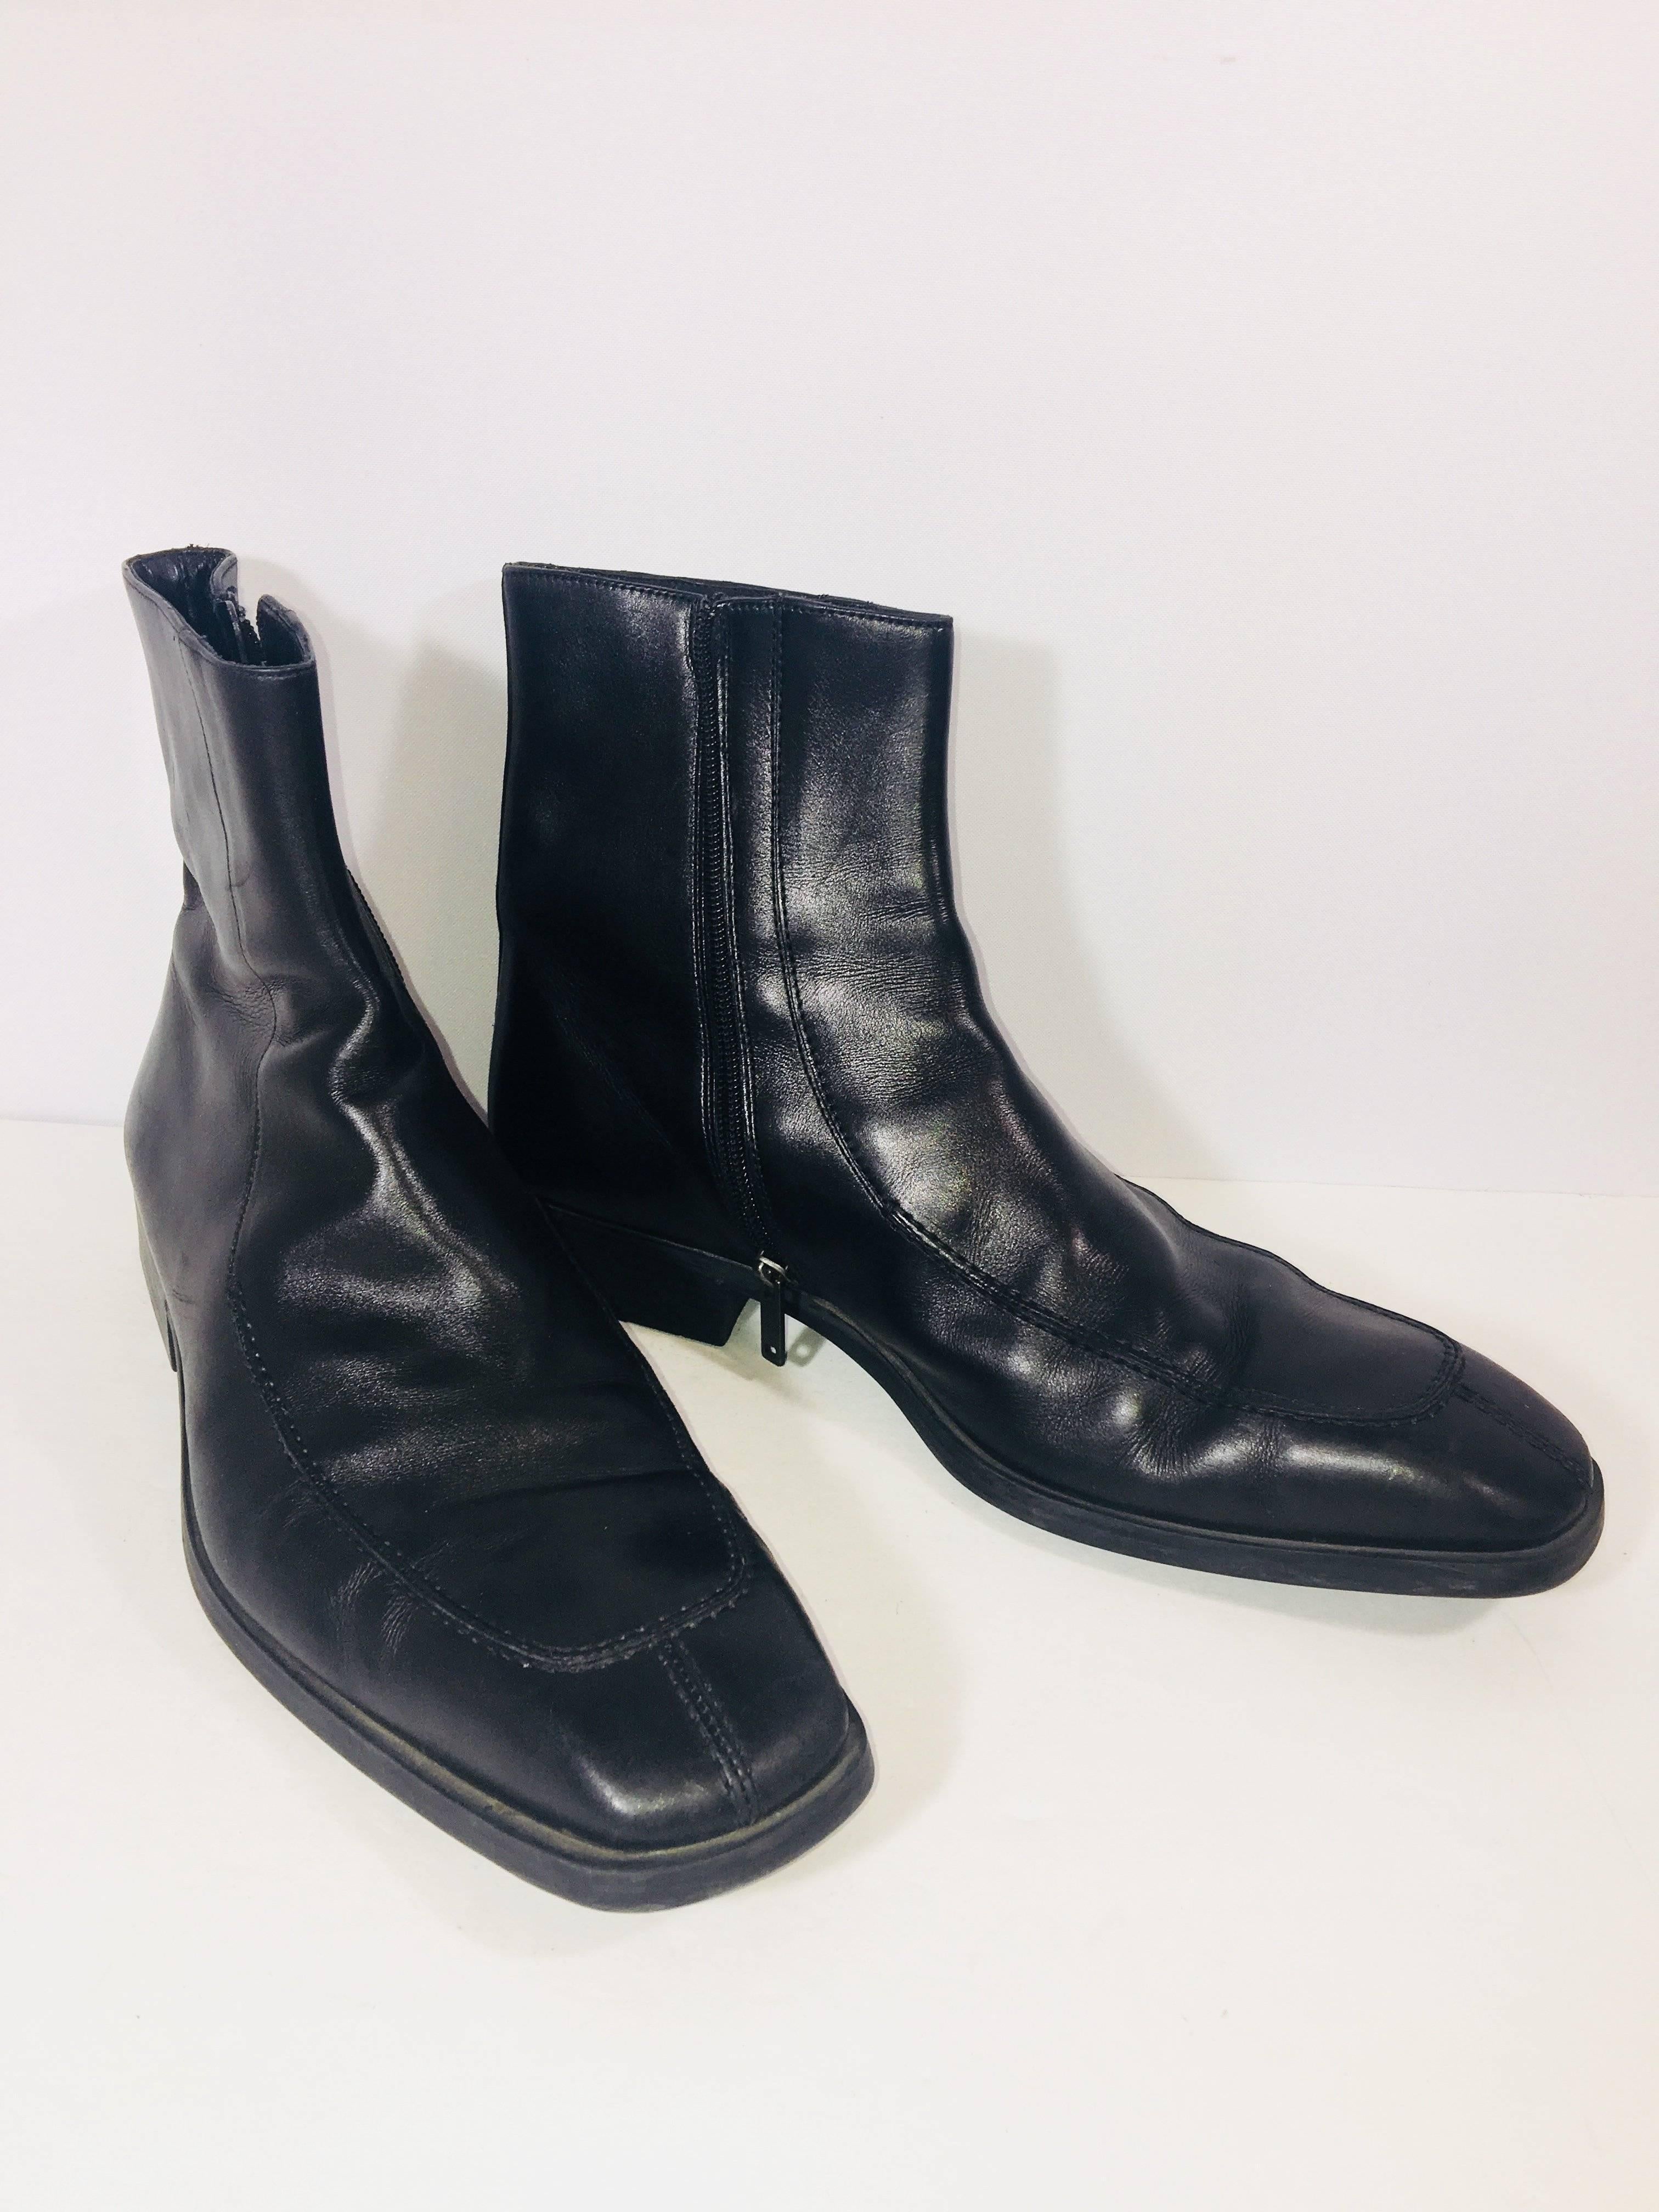 Men's Gucci Black Leather Ankle Boot with Side Zipper and Square Toe.